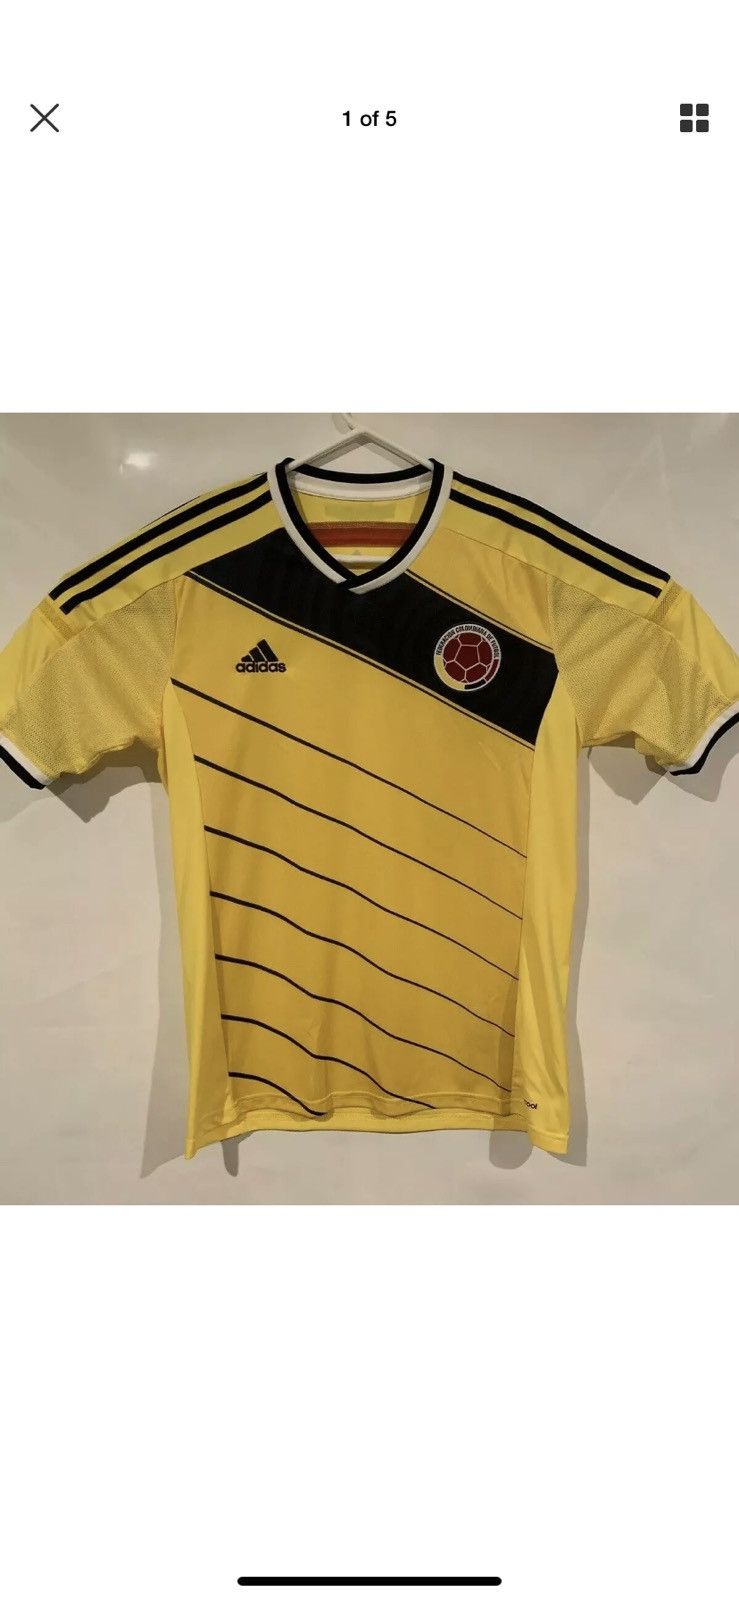 Adidas Adidas Columbia soccer jersey yellow rare authentic Size US M / EU 48-50 / 2 - 1 Preview